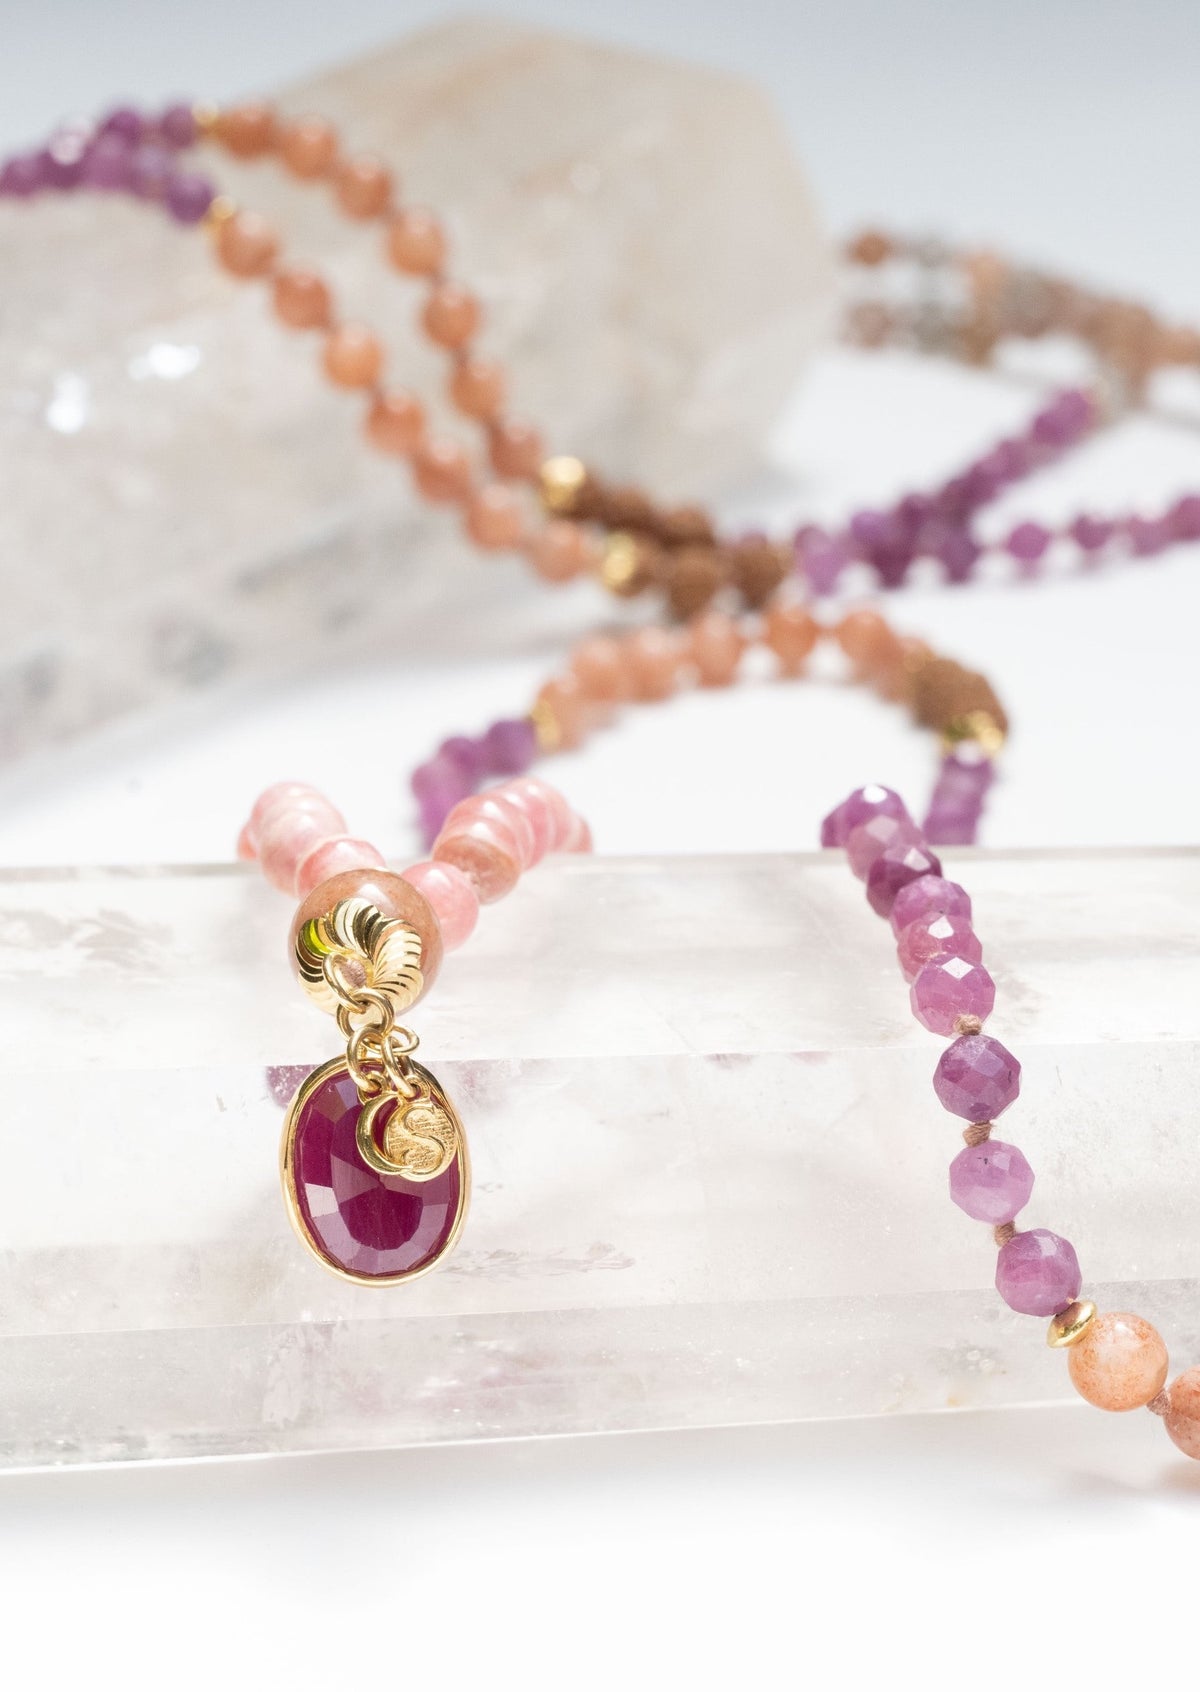 AMMA Woman of Light Ruby Mala with Rose Gold, Sunstone and Rhodochrosite.